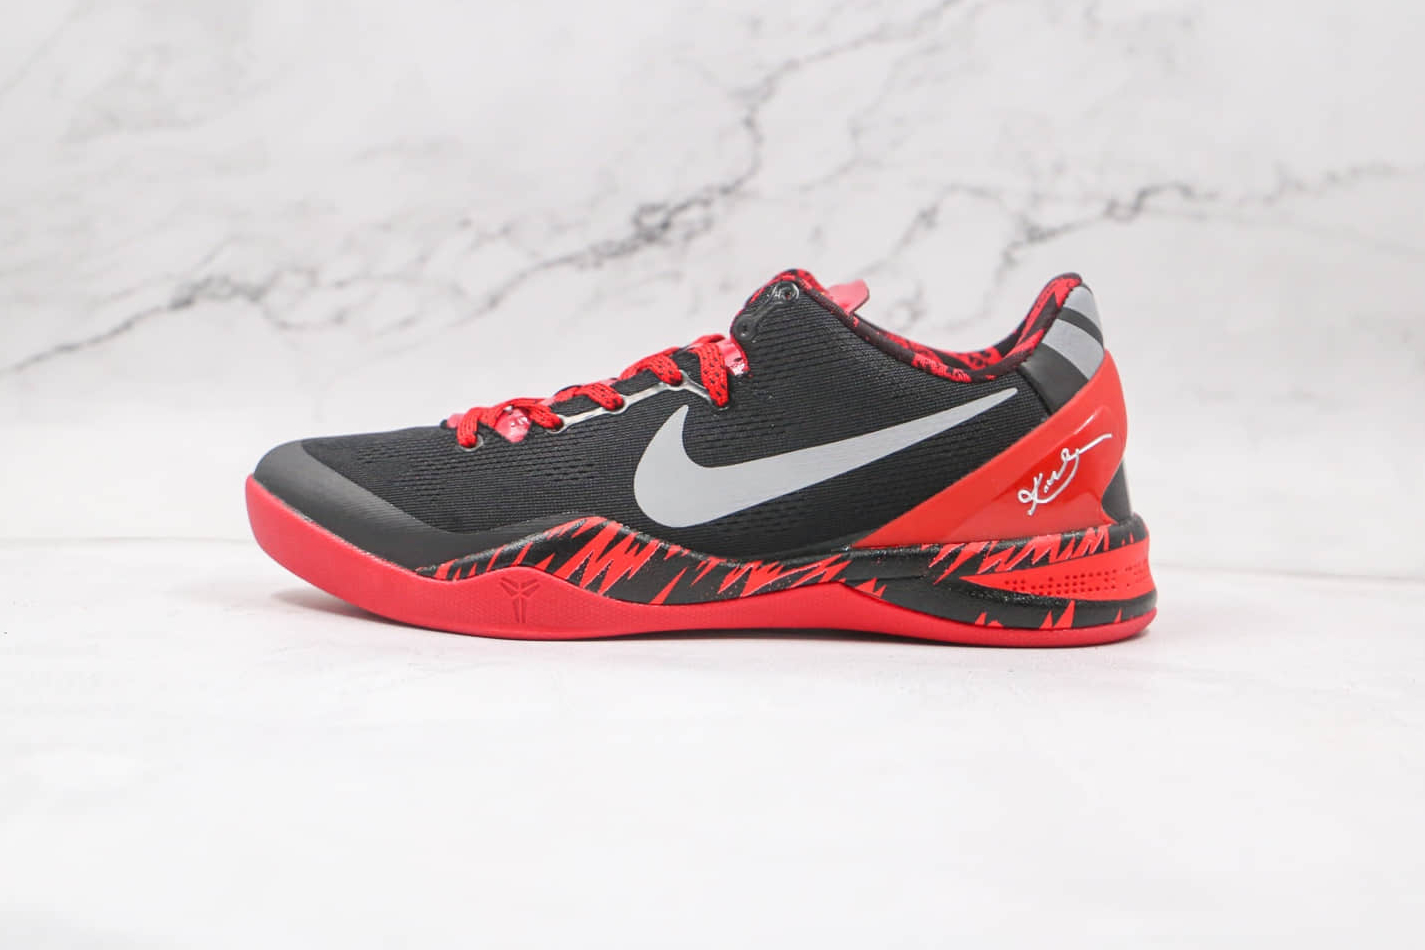 Nike Kobe 8 System Philippines Pack Gym Red 613959-002 - Premium Basketball Shoes